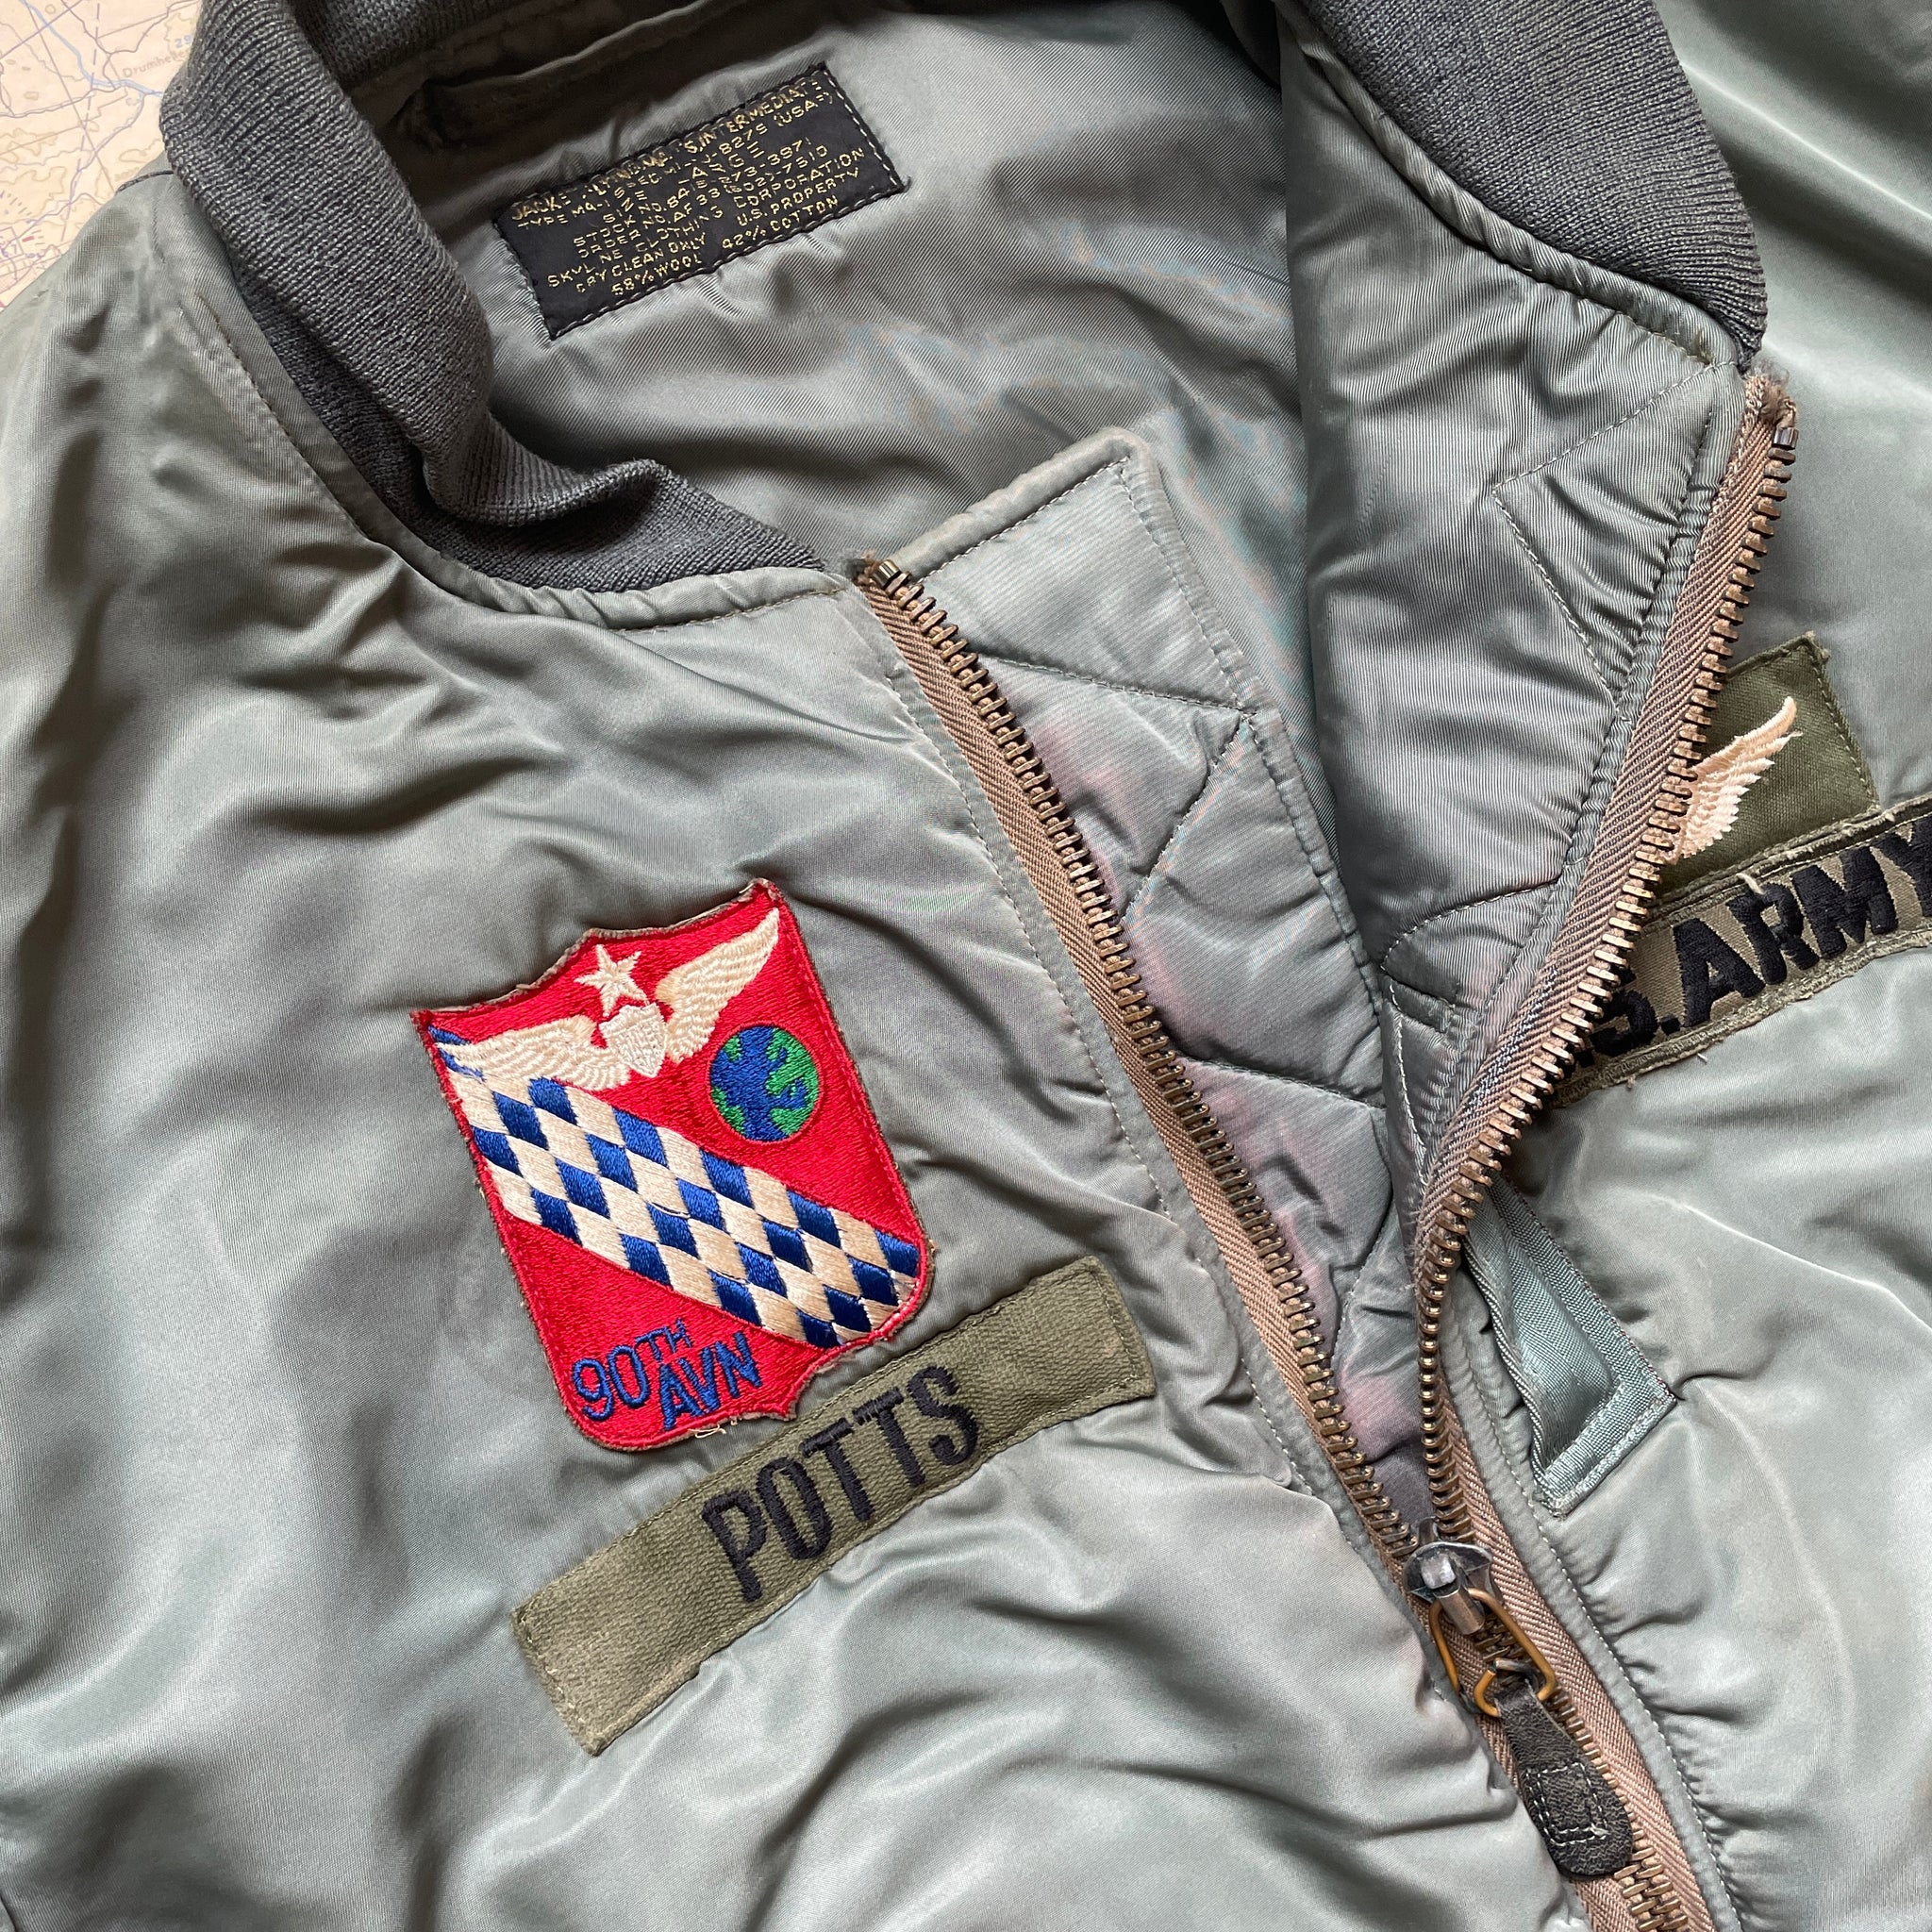 US Army 1955 MA-1 Jacket - MIL-J-8279 First Pattern – The Major's 